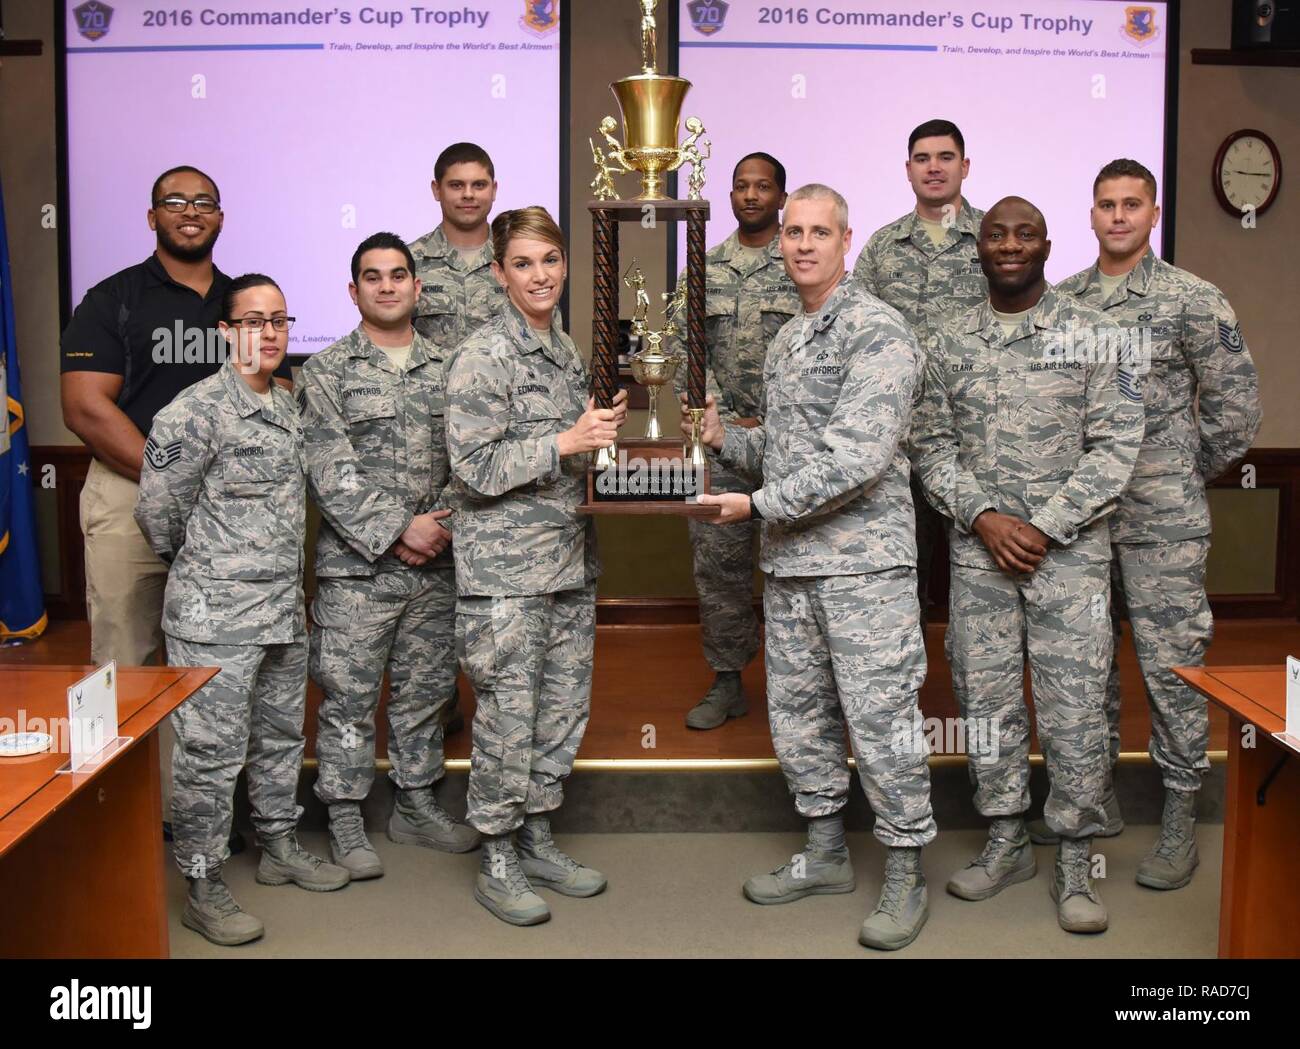 Col. Michele Edmondson, 81st Training Wing commander, presents the Commander’s Trophy to Airmen from the 334th Training Squadron at Stennis Hall Jan. 18, 2017, on Keesler Air Force Base, Miss. Competing squadrons earn points based on their participation in the intramural sports program and special events facilitated by the base fitness centers. This is the 7th consecutive year the “Gators” earned the trophy. Stock Photo